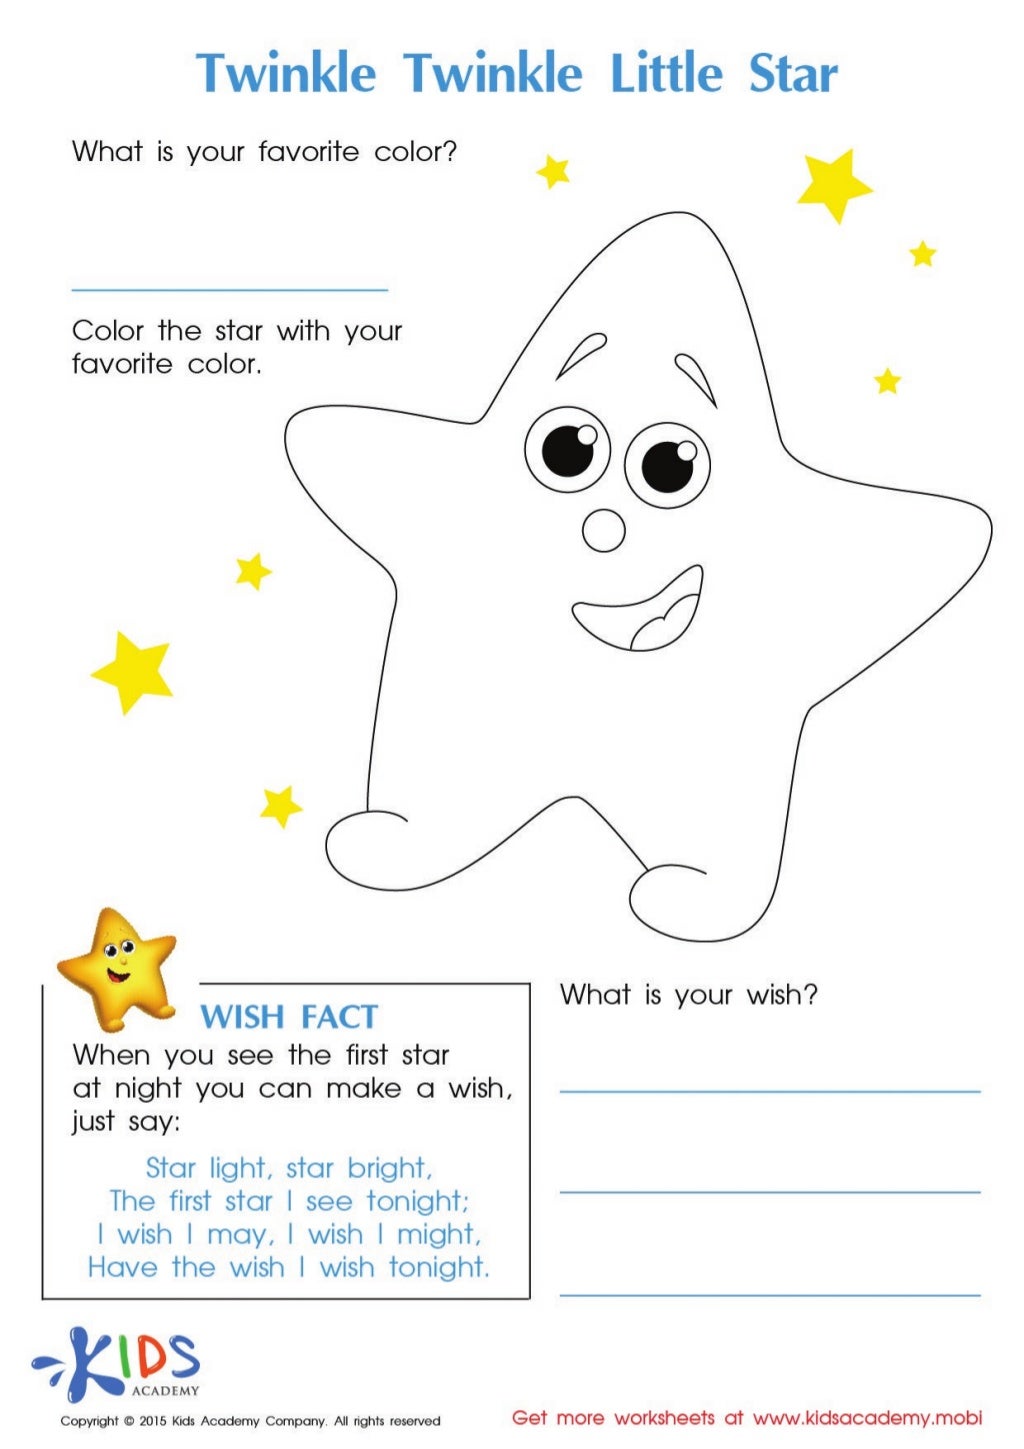 Download Twinkle Twinkle Little Star coloring pages and lyrics